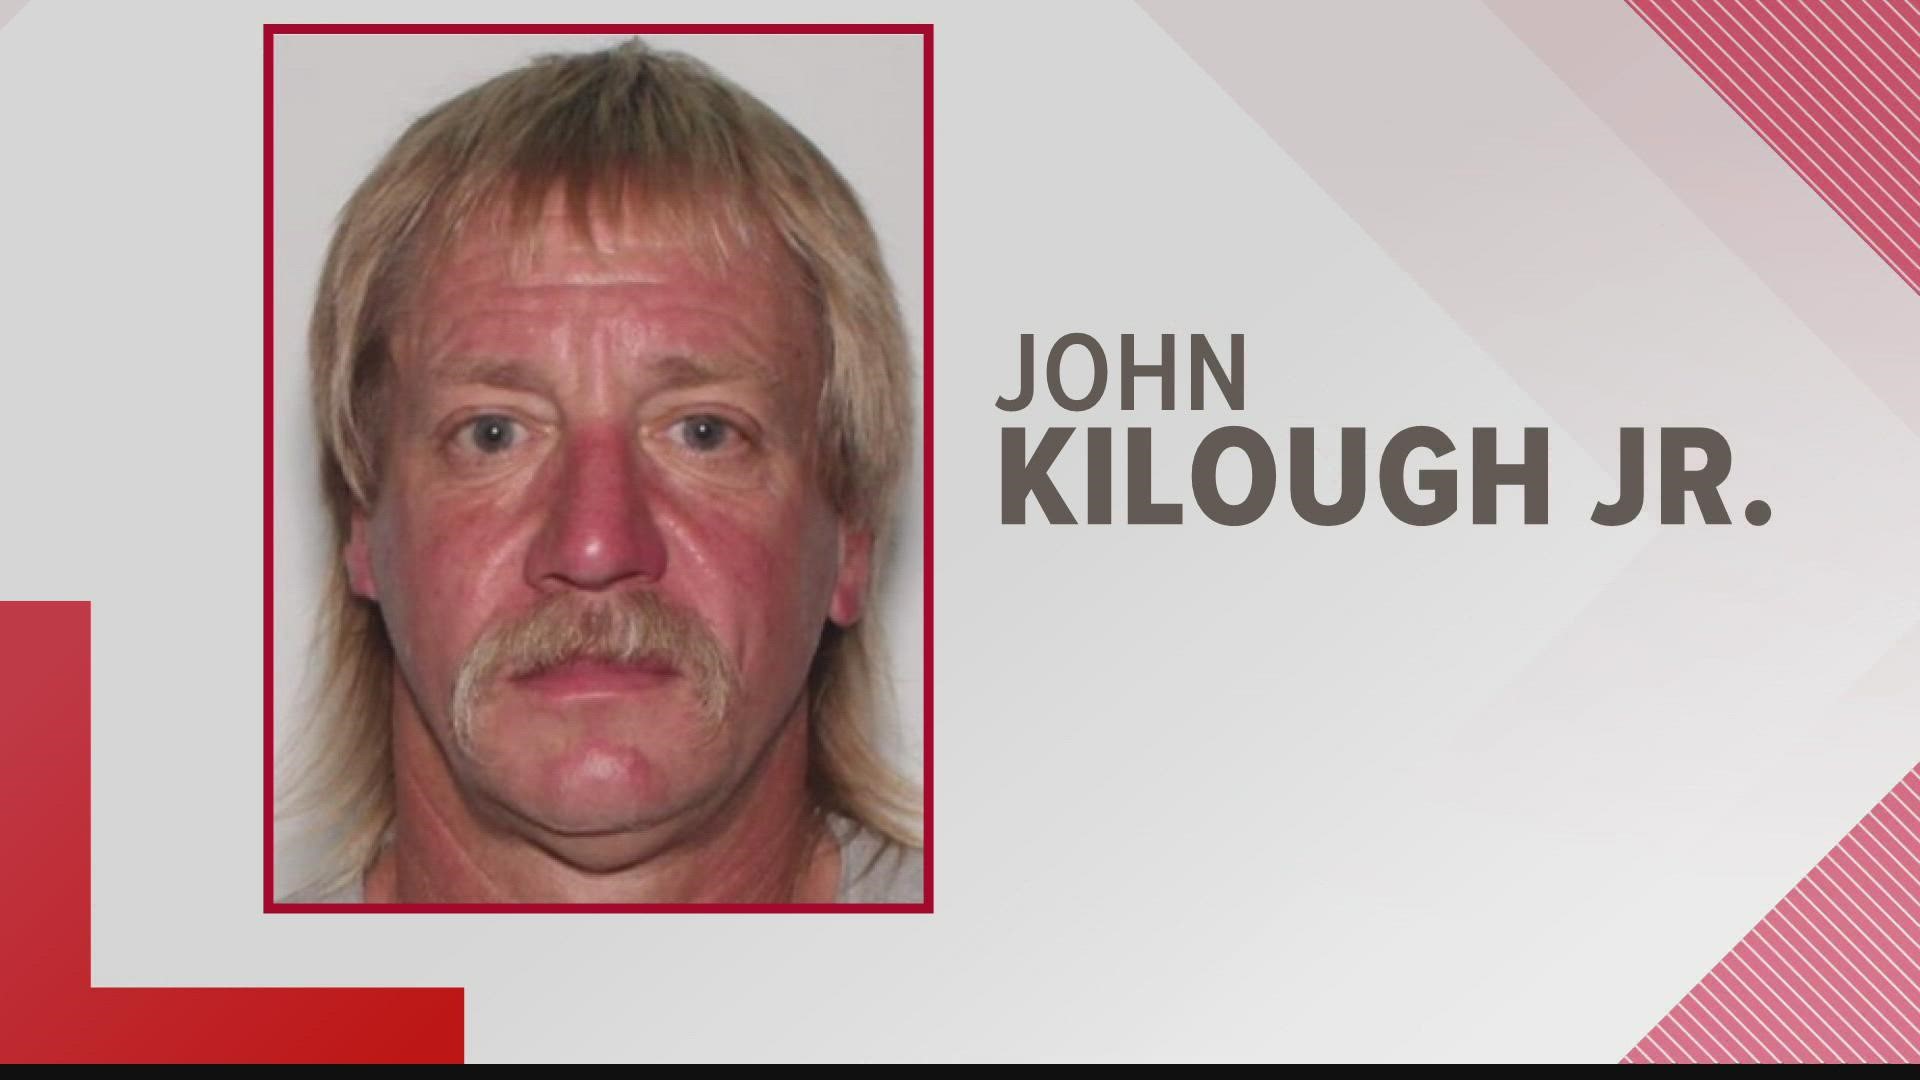 Police arrested 52-year-old John Killough Jr. Saturday in the death of 11-year-old Kyson Beatty on Dec. 11, 2021.